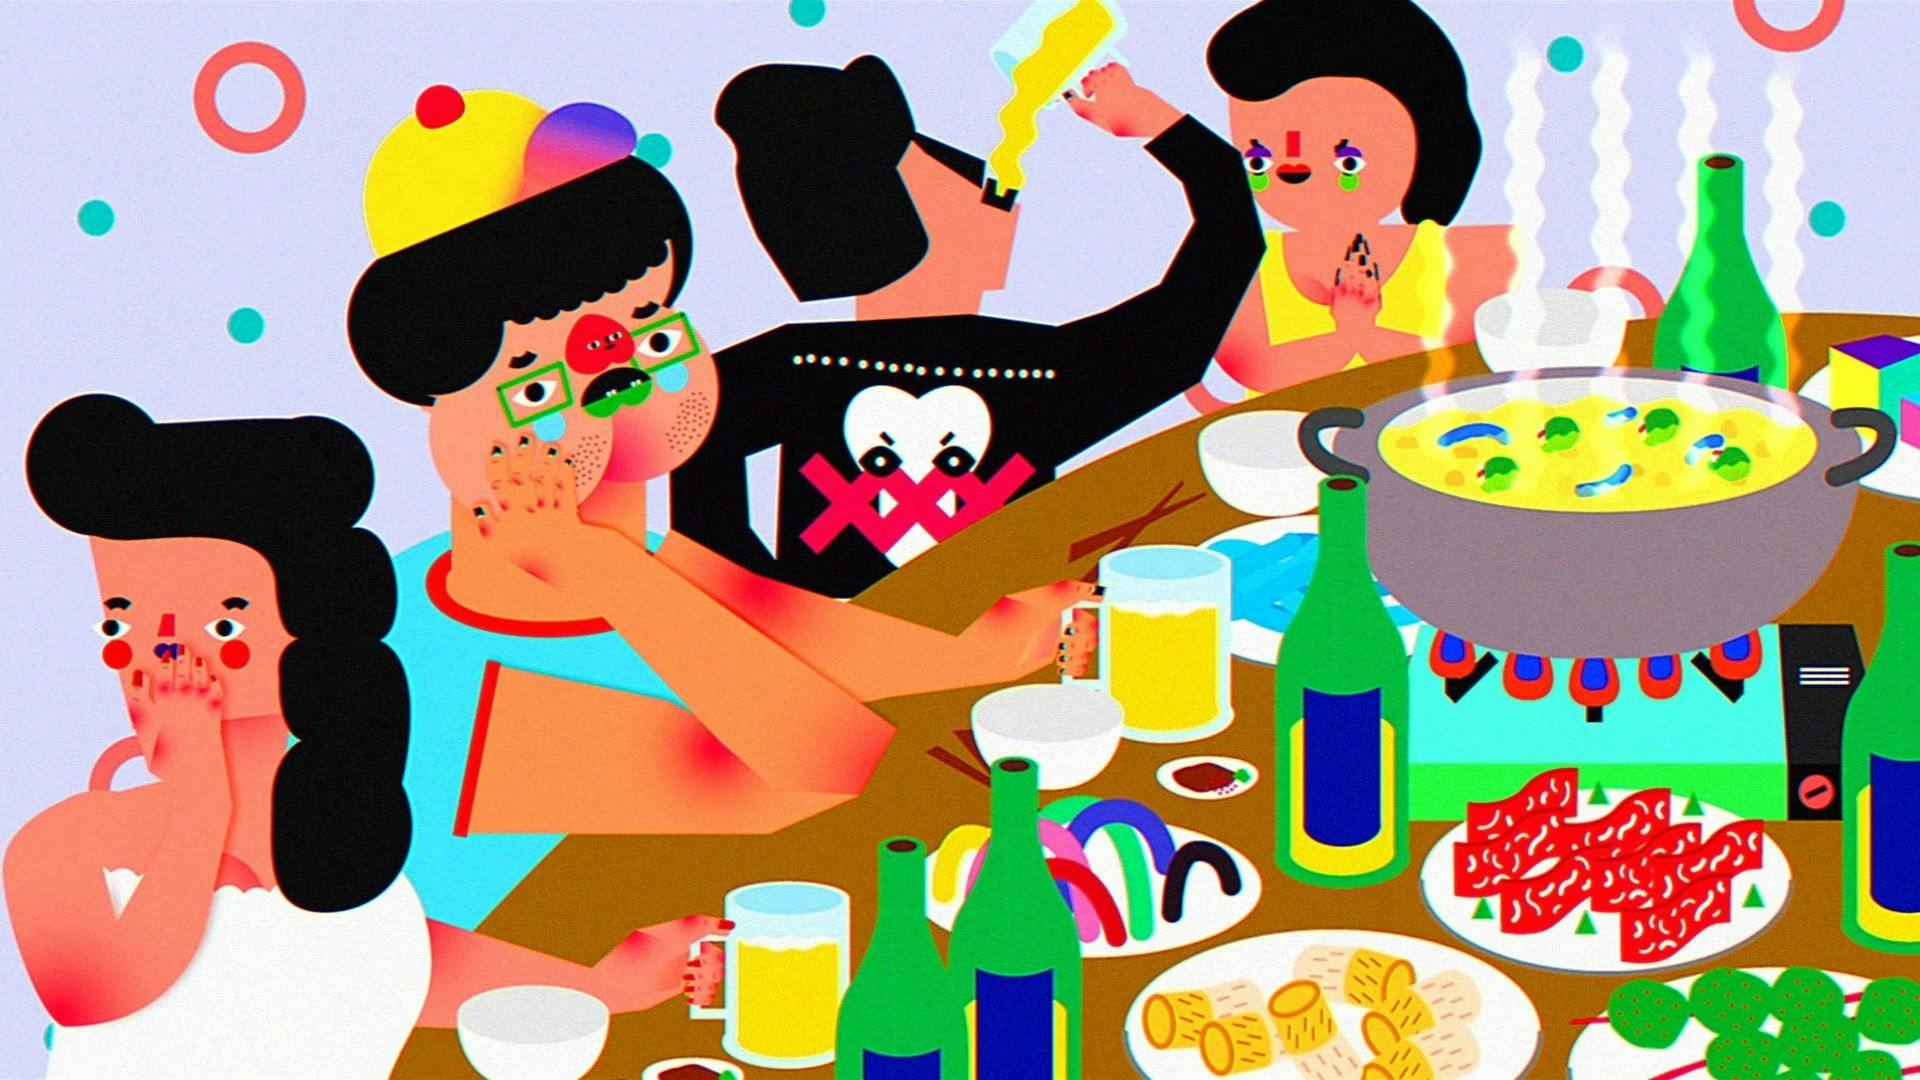 Computer-generated, cartoon-like image of four people sat at a table with lots of food and drink laid on it. The people are socialising or looking off into the distance.